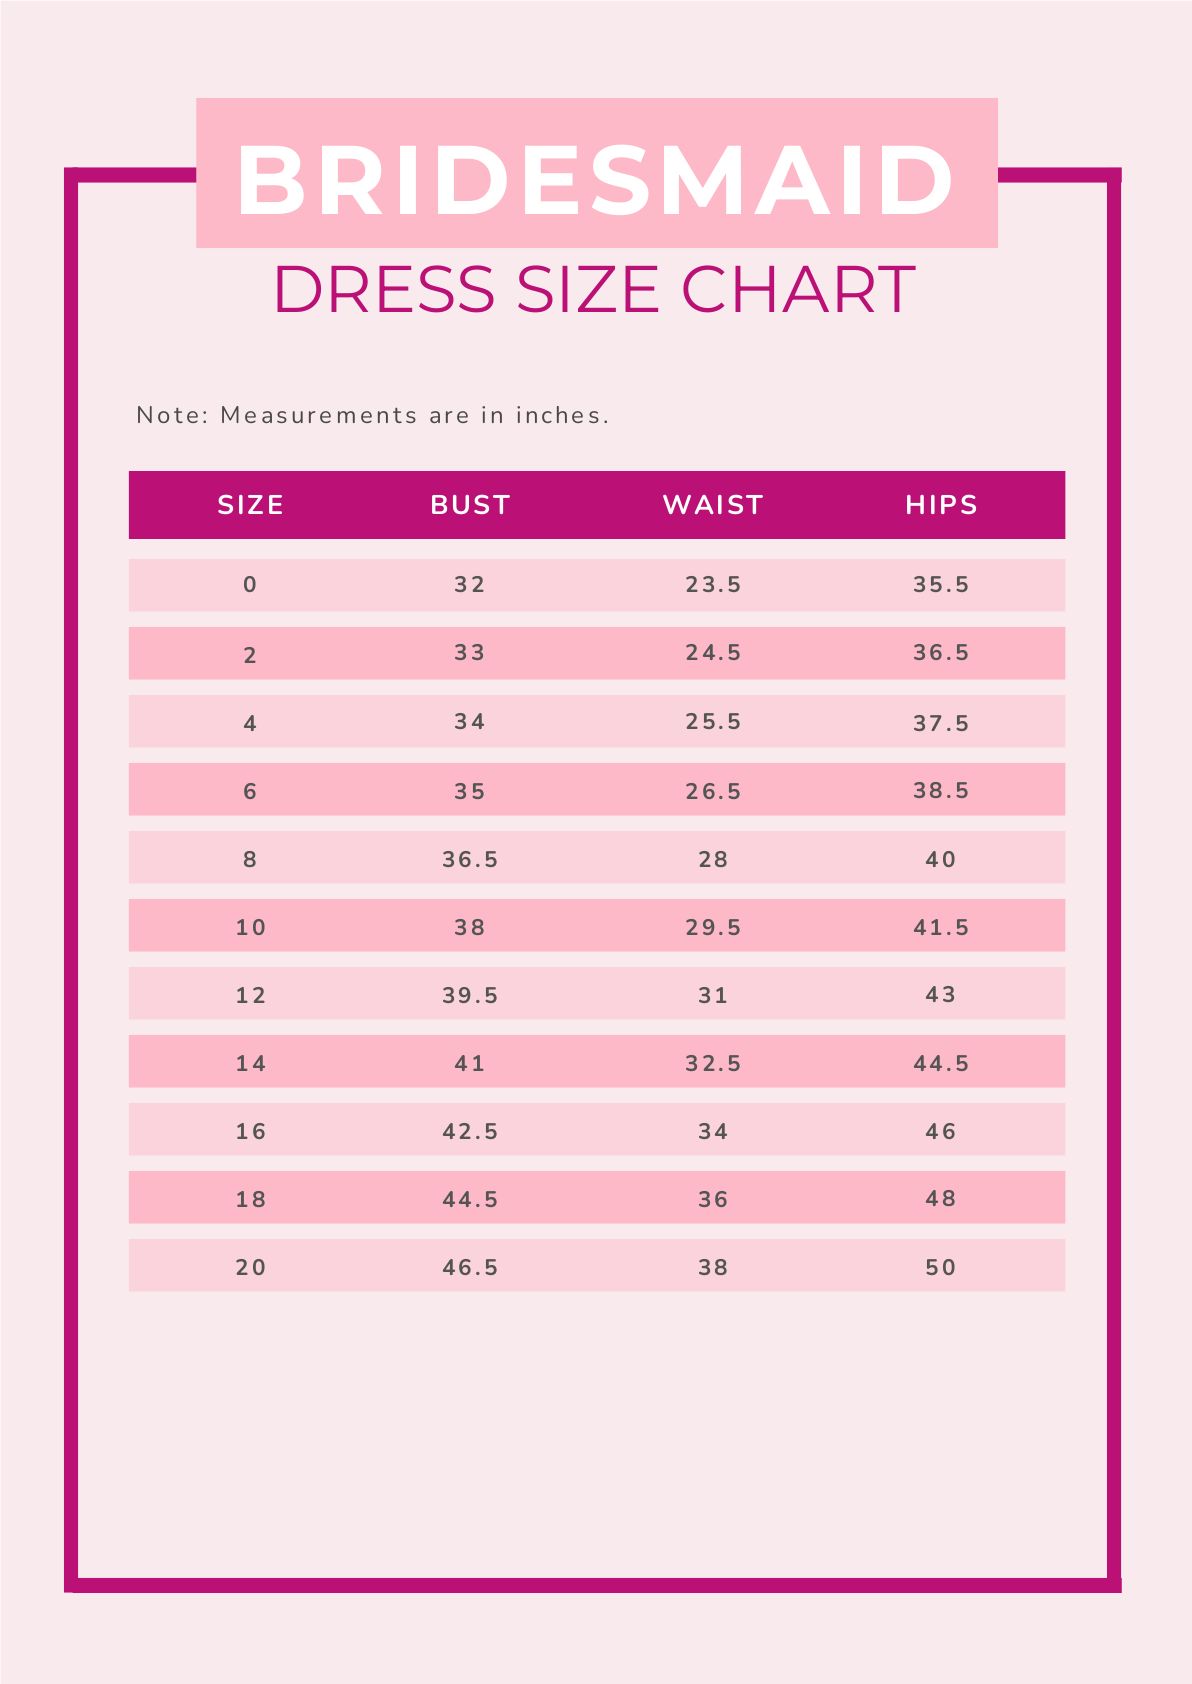 Alice And Dress Size Chart